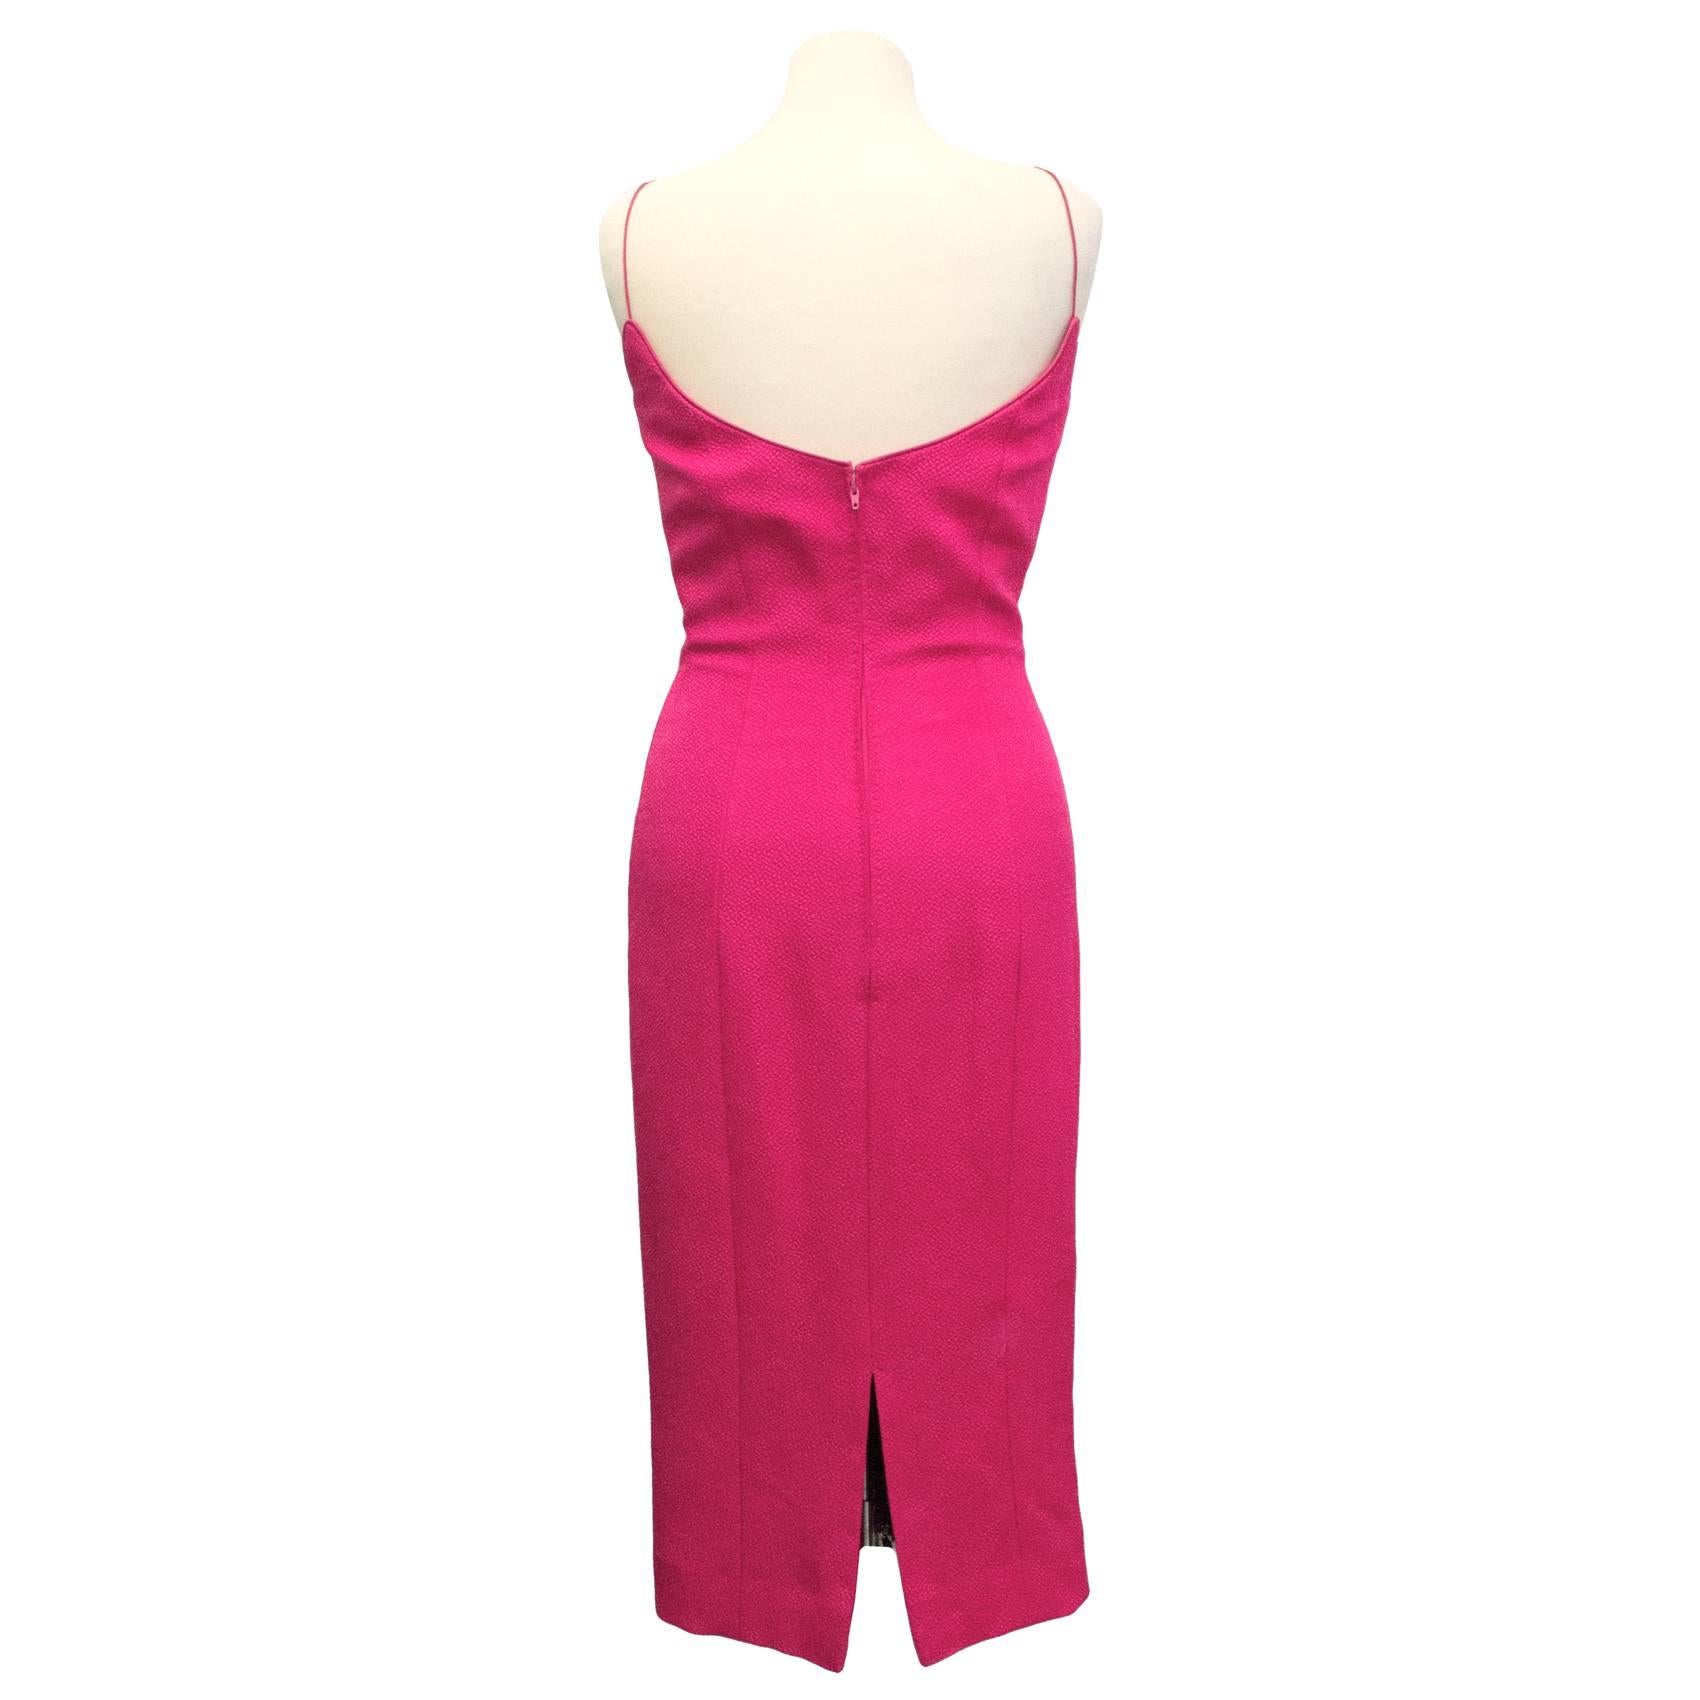 L'Wren Scott below the knee jacquard dress with scooped neckline in fuchsia. Lined in a spandex mix fabric and fastened with a concealed zip at the back and a hook and eye clasp. Small slit in back. 

Please note: Slight discolouration of the